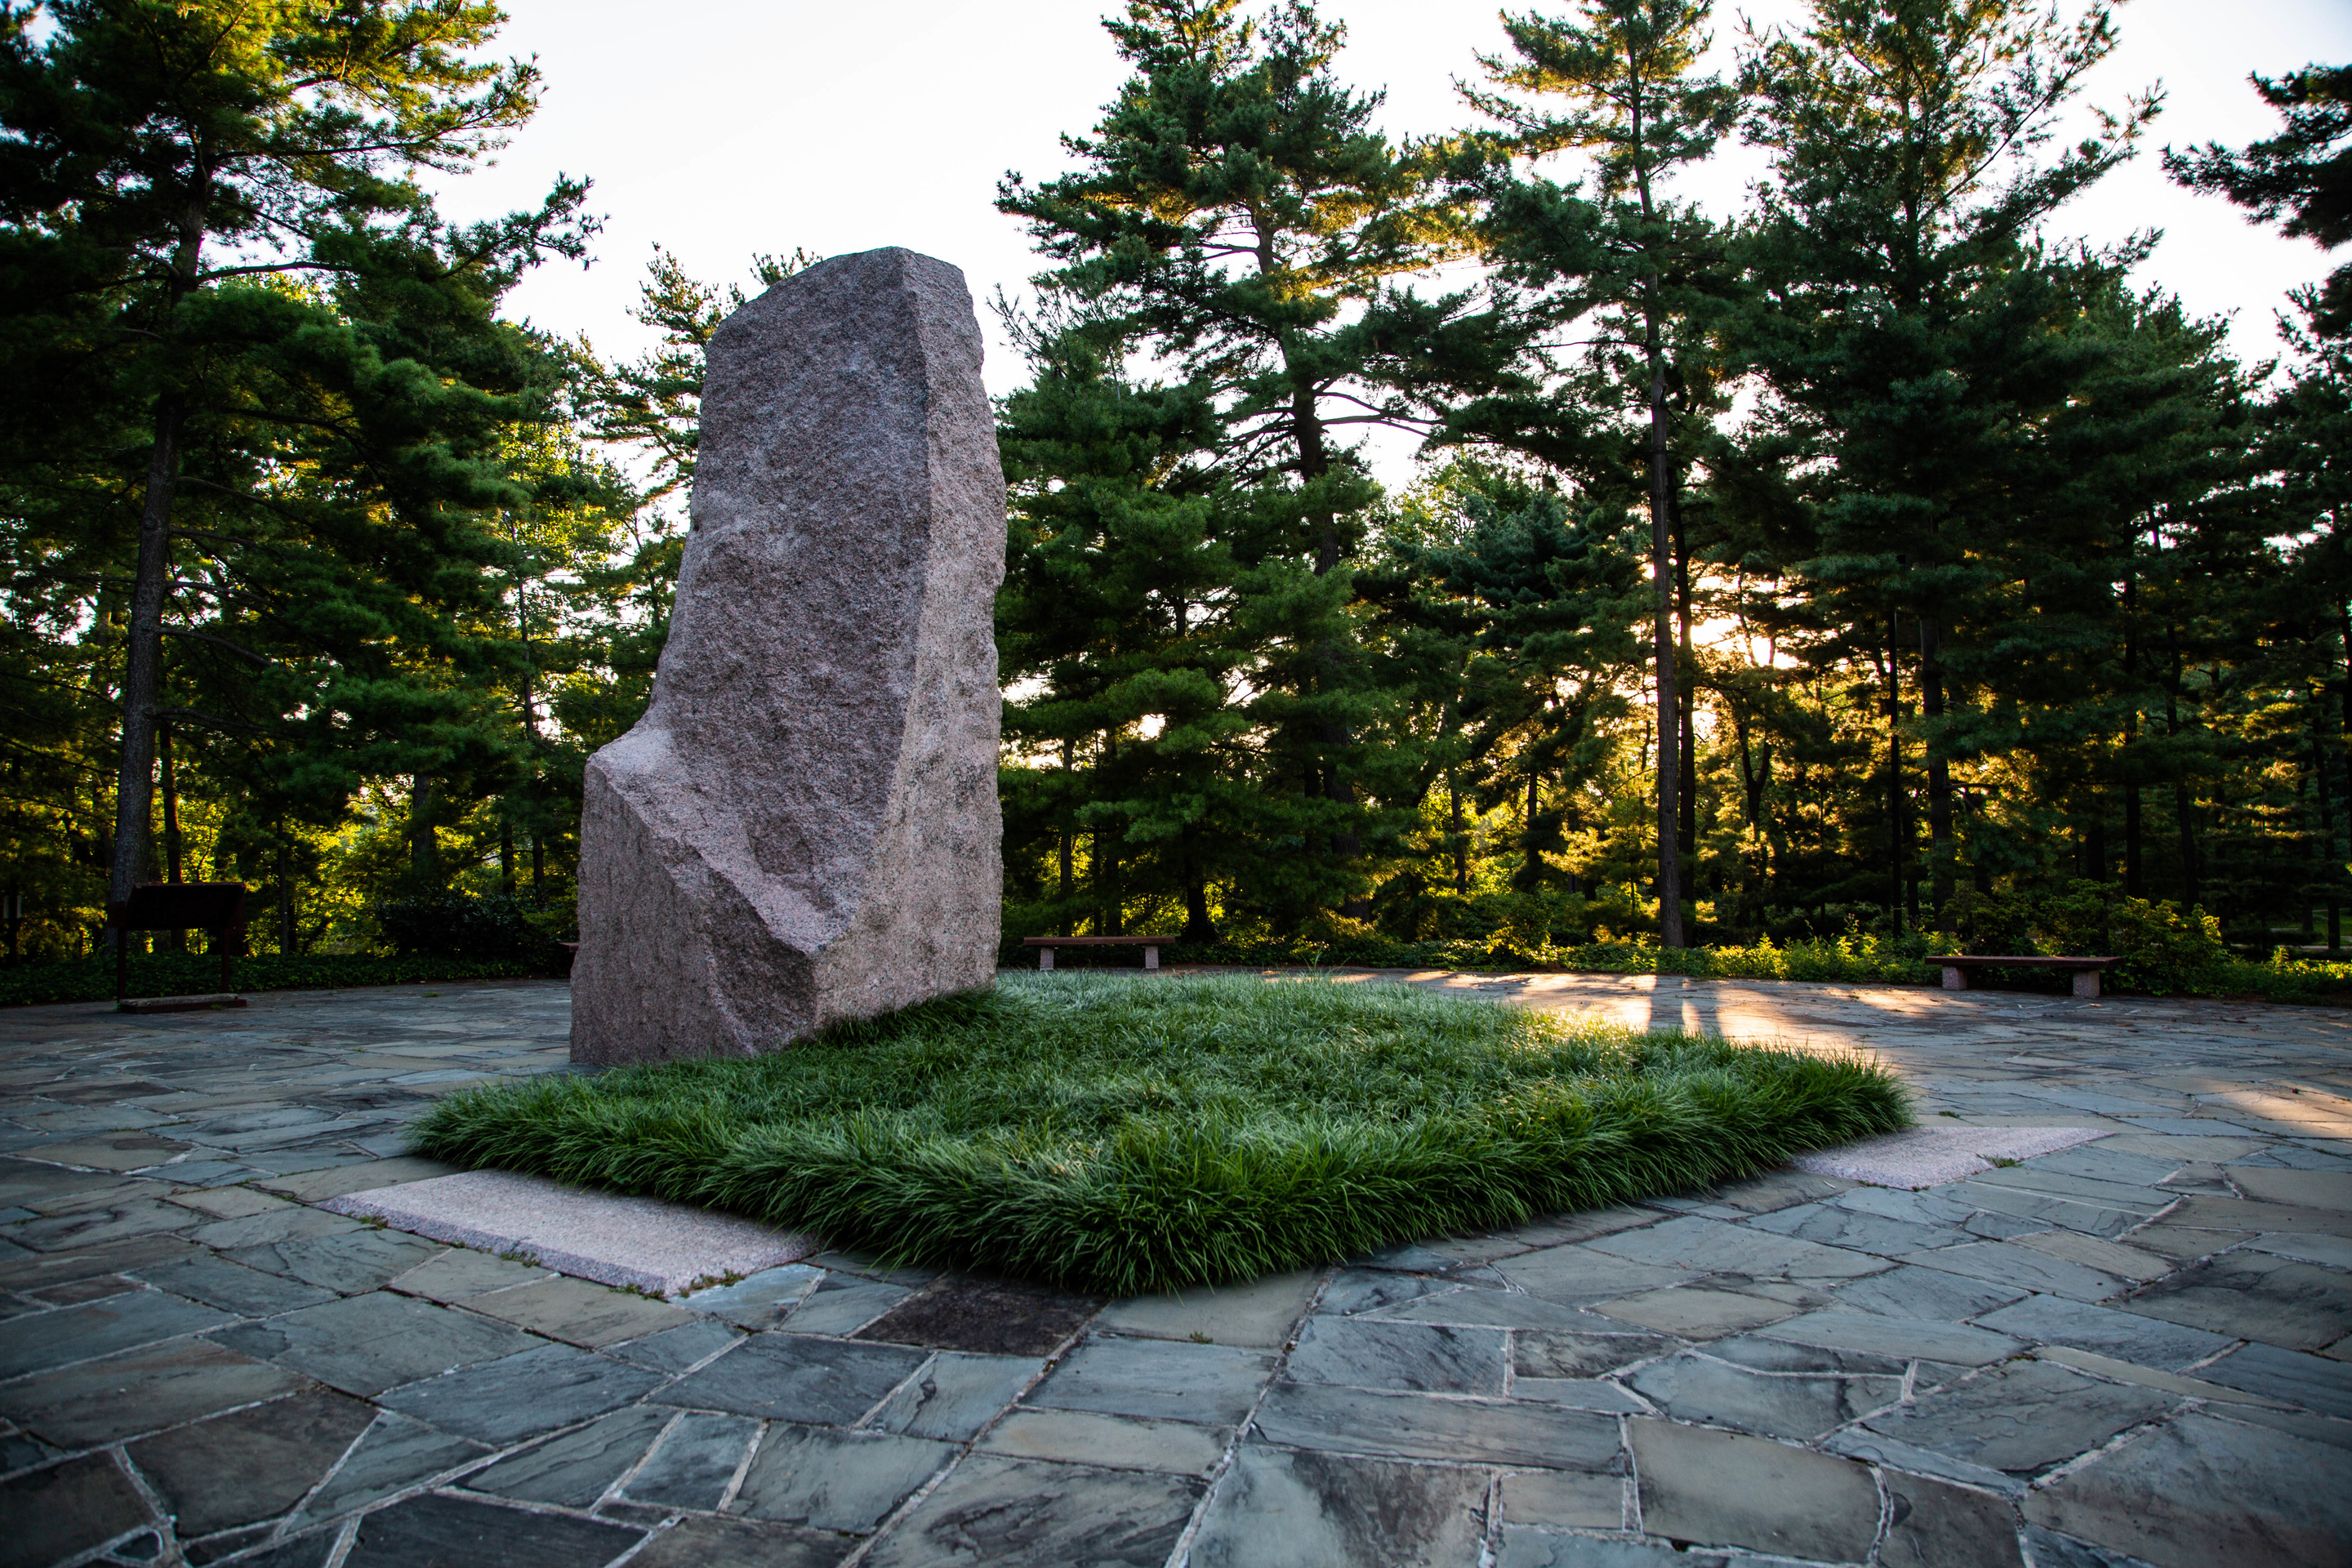 Granite monolith and grass patch on a stone plaza at sunset